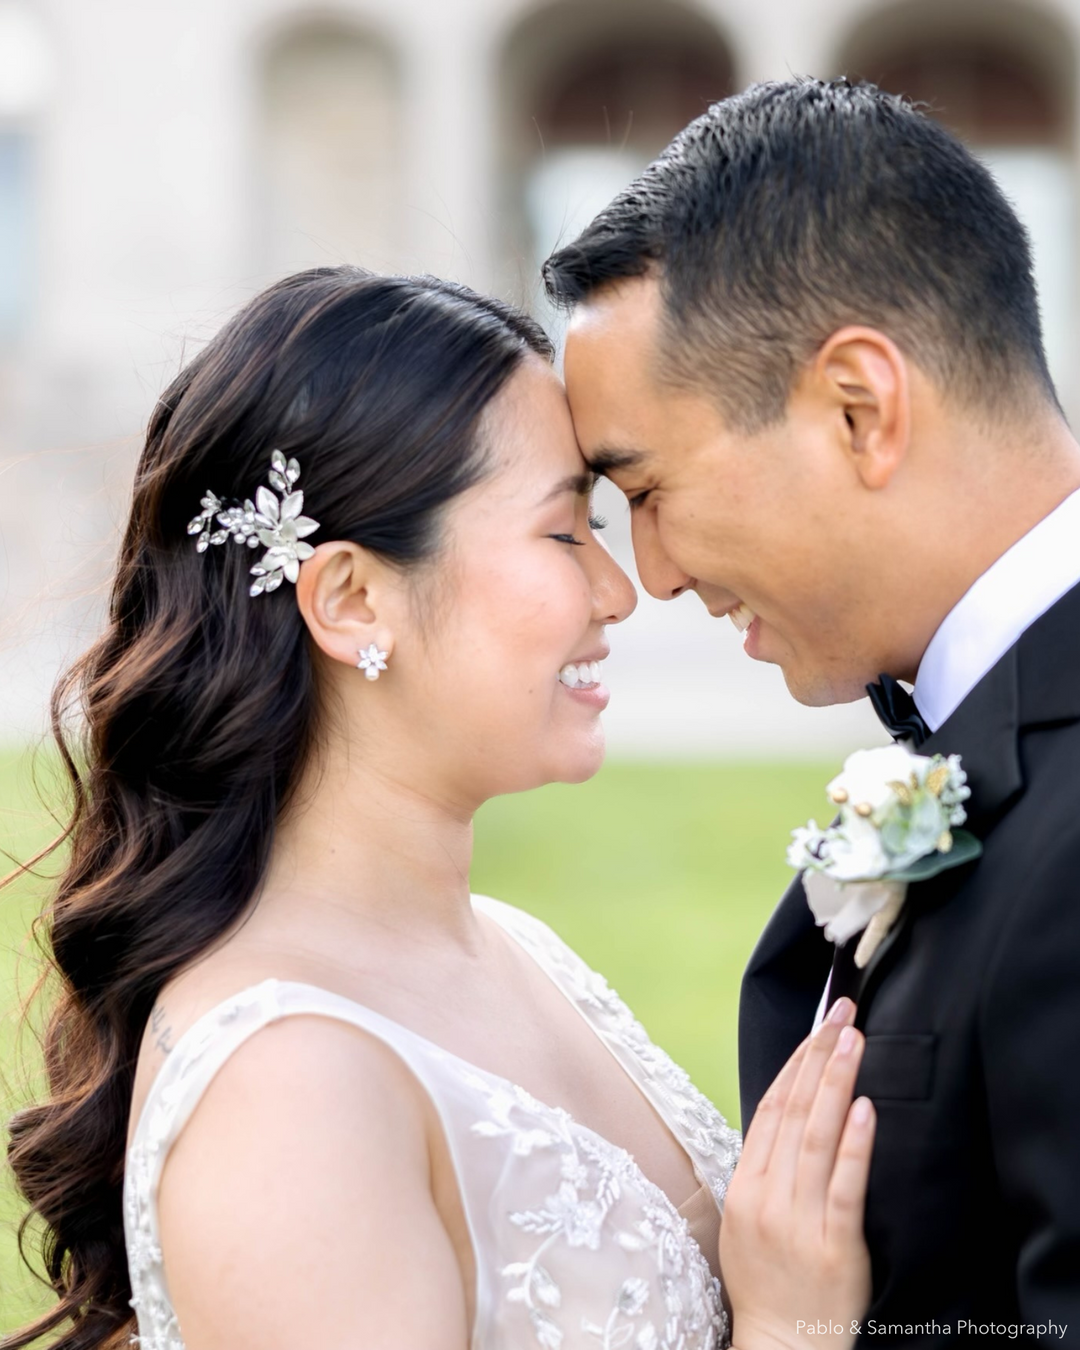 Bride wearing earrings and floral hair pin on her wedding day with groom